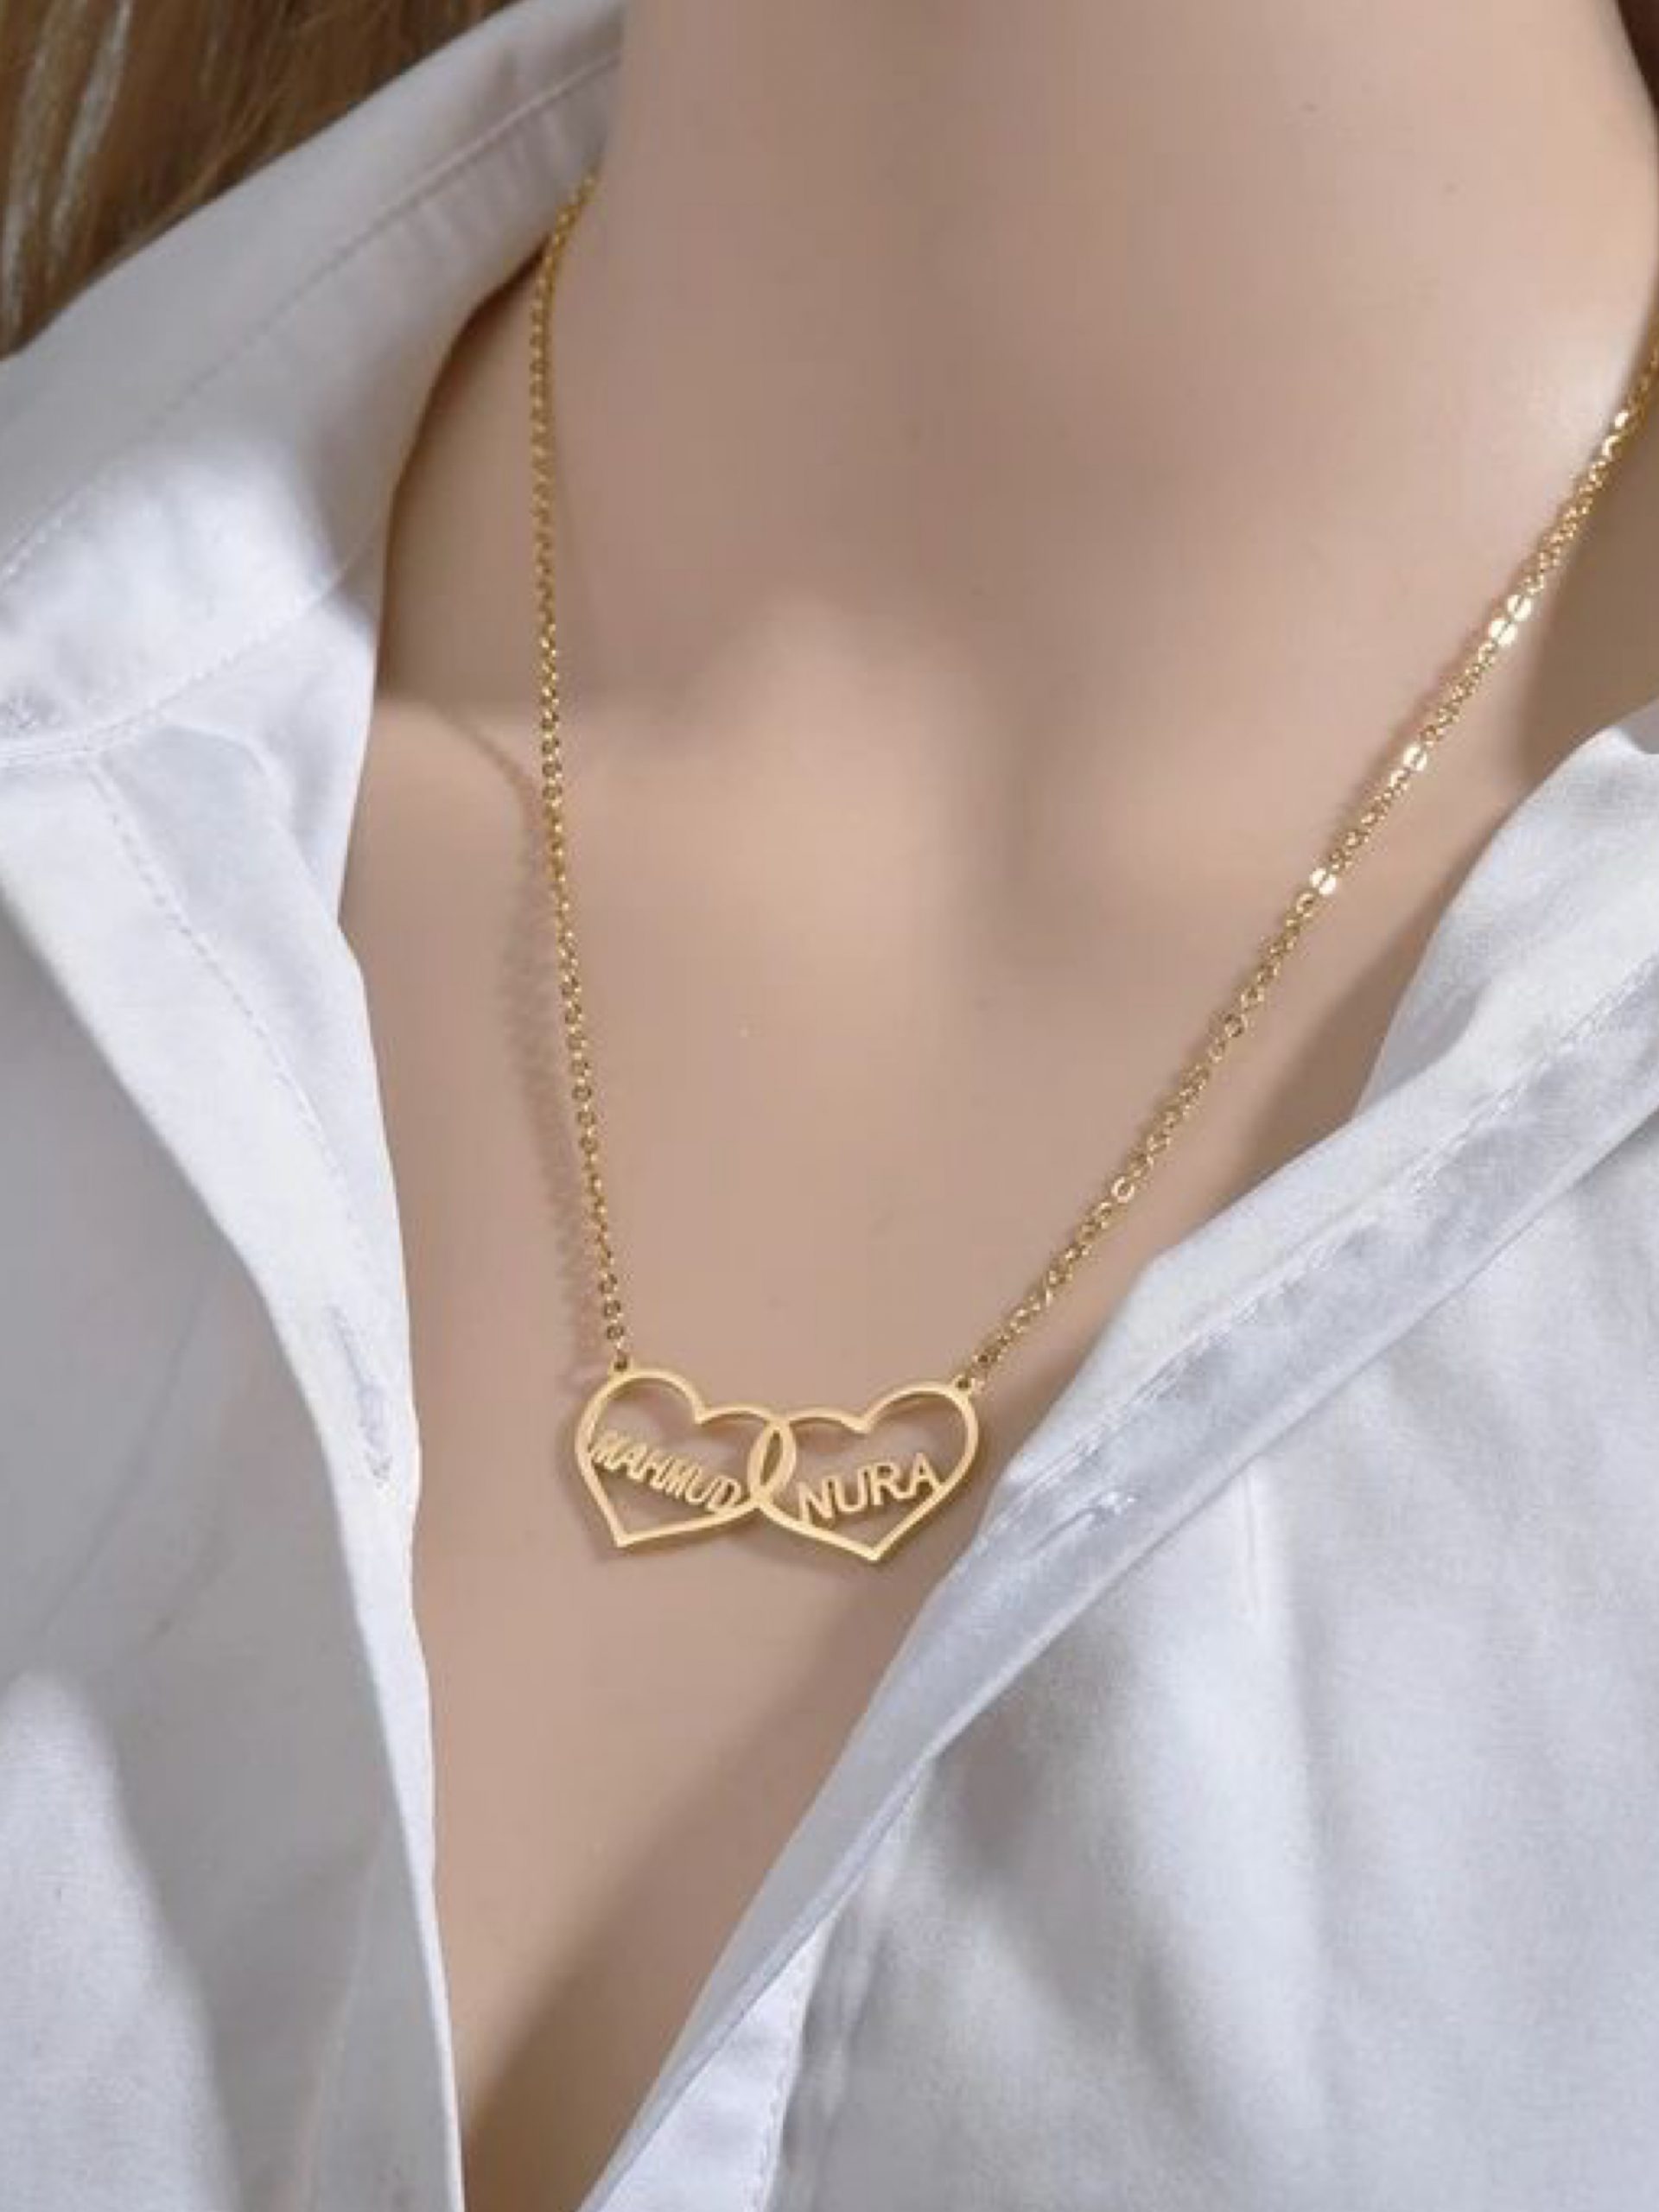 Couple Name necklace